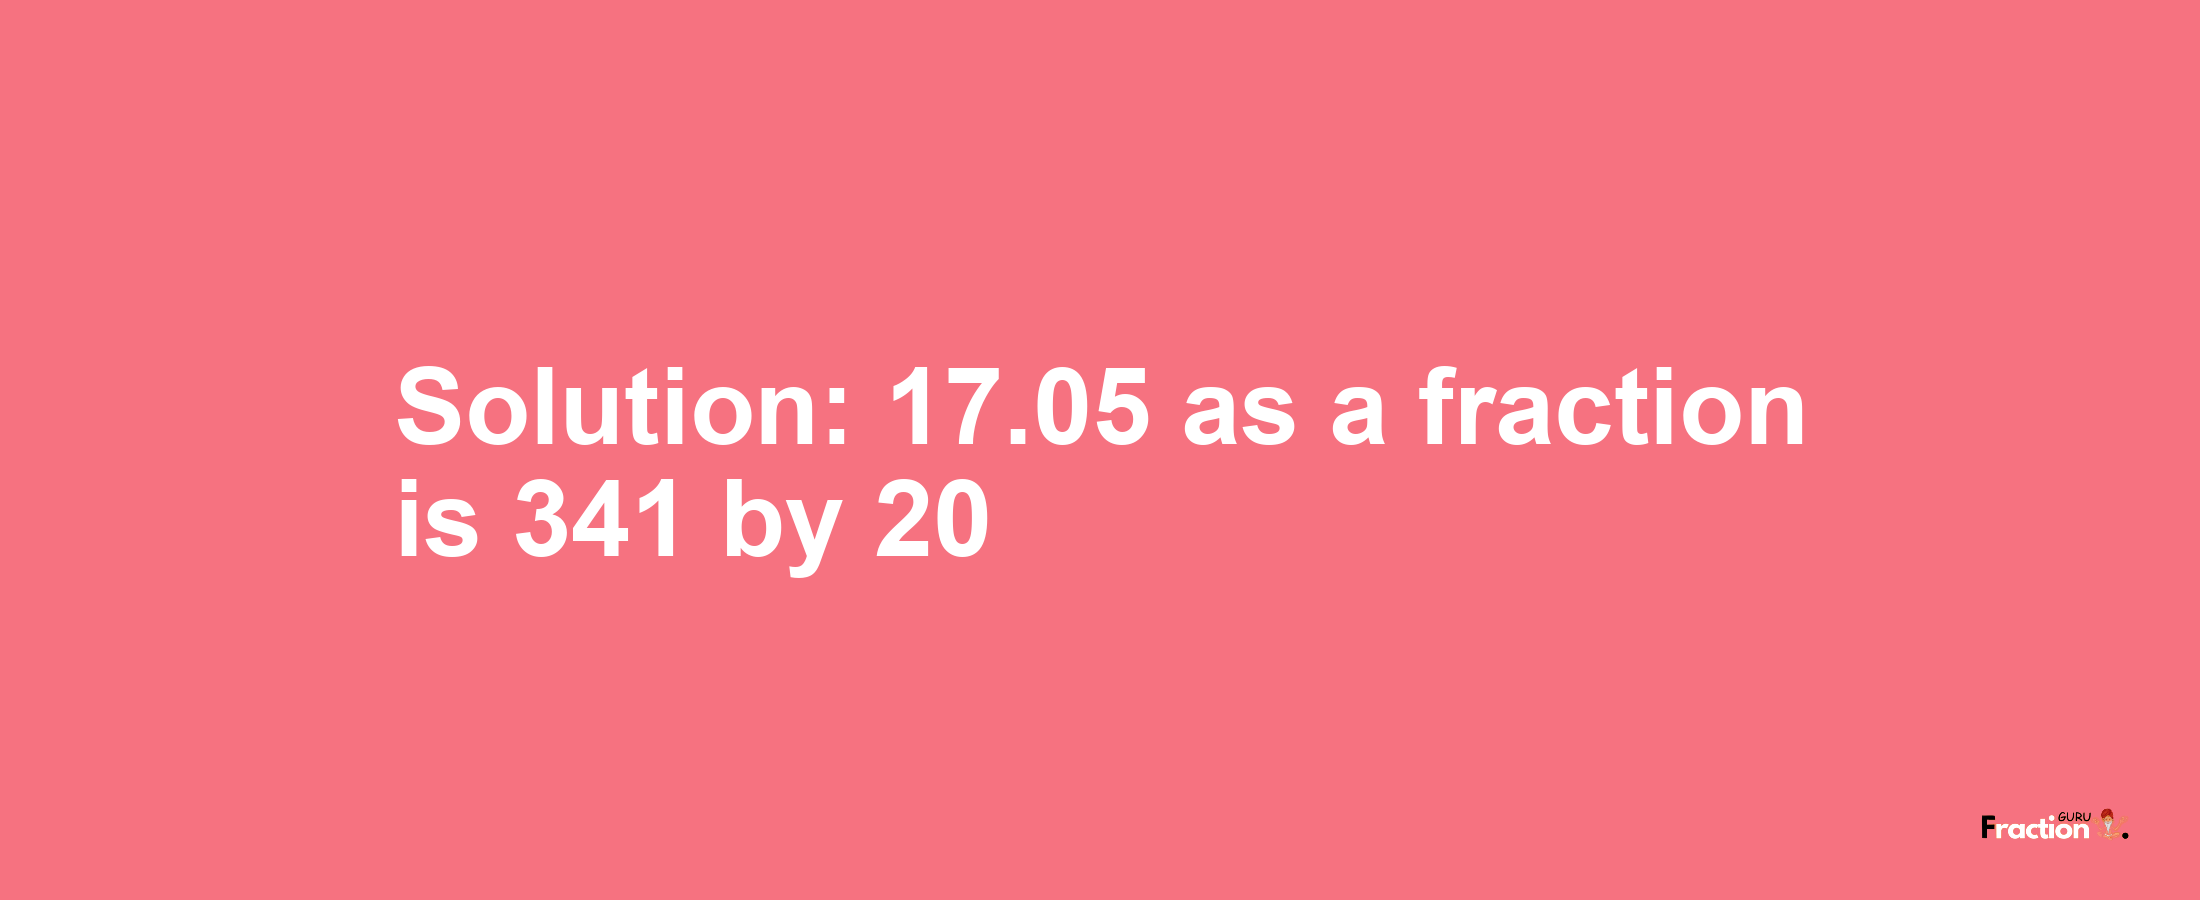 Solution:17.05 as a fraction is 341/20